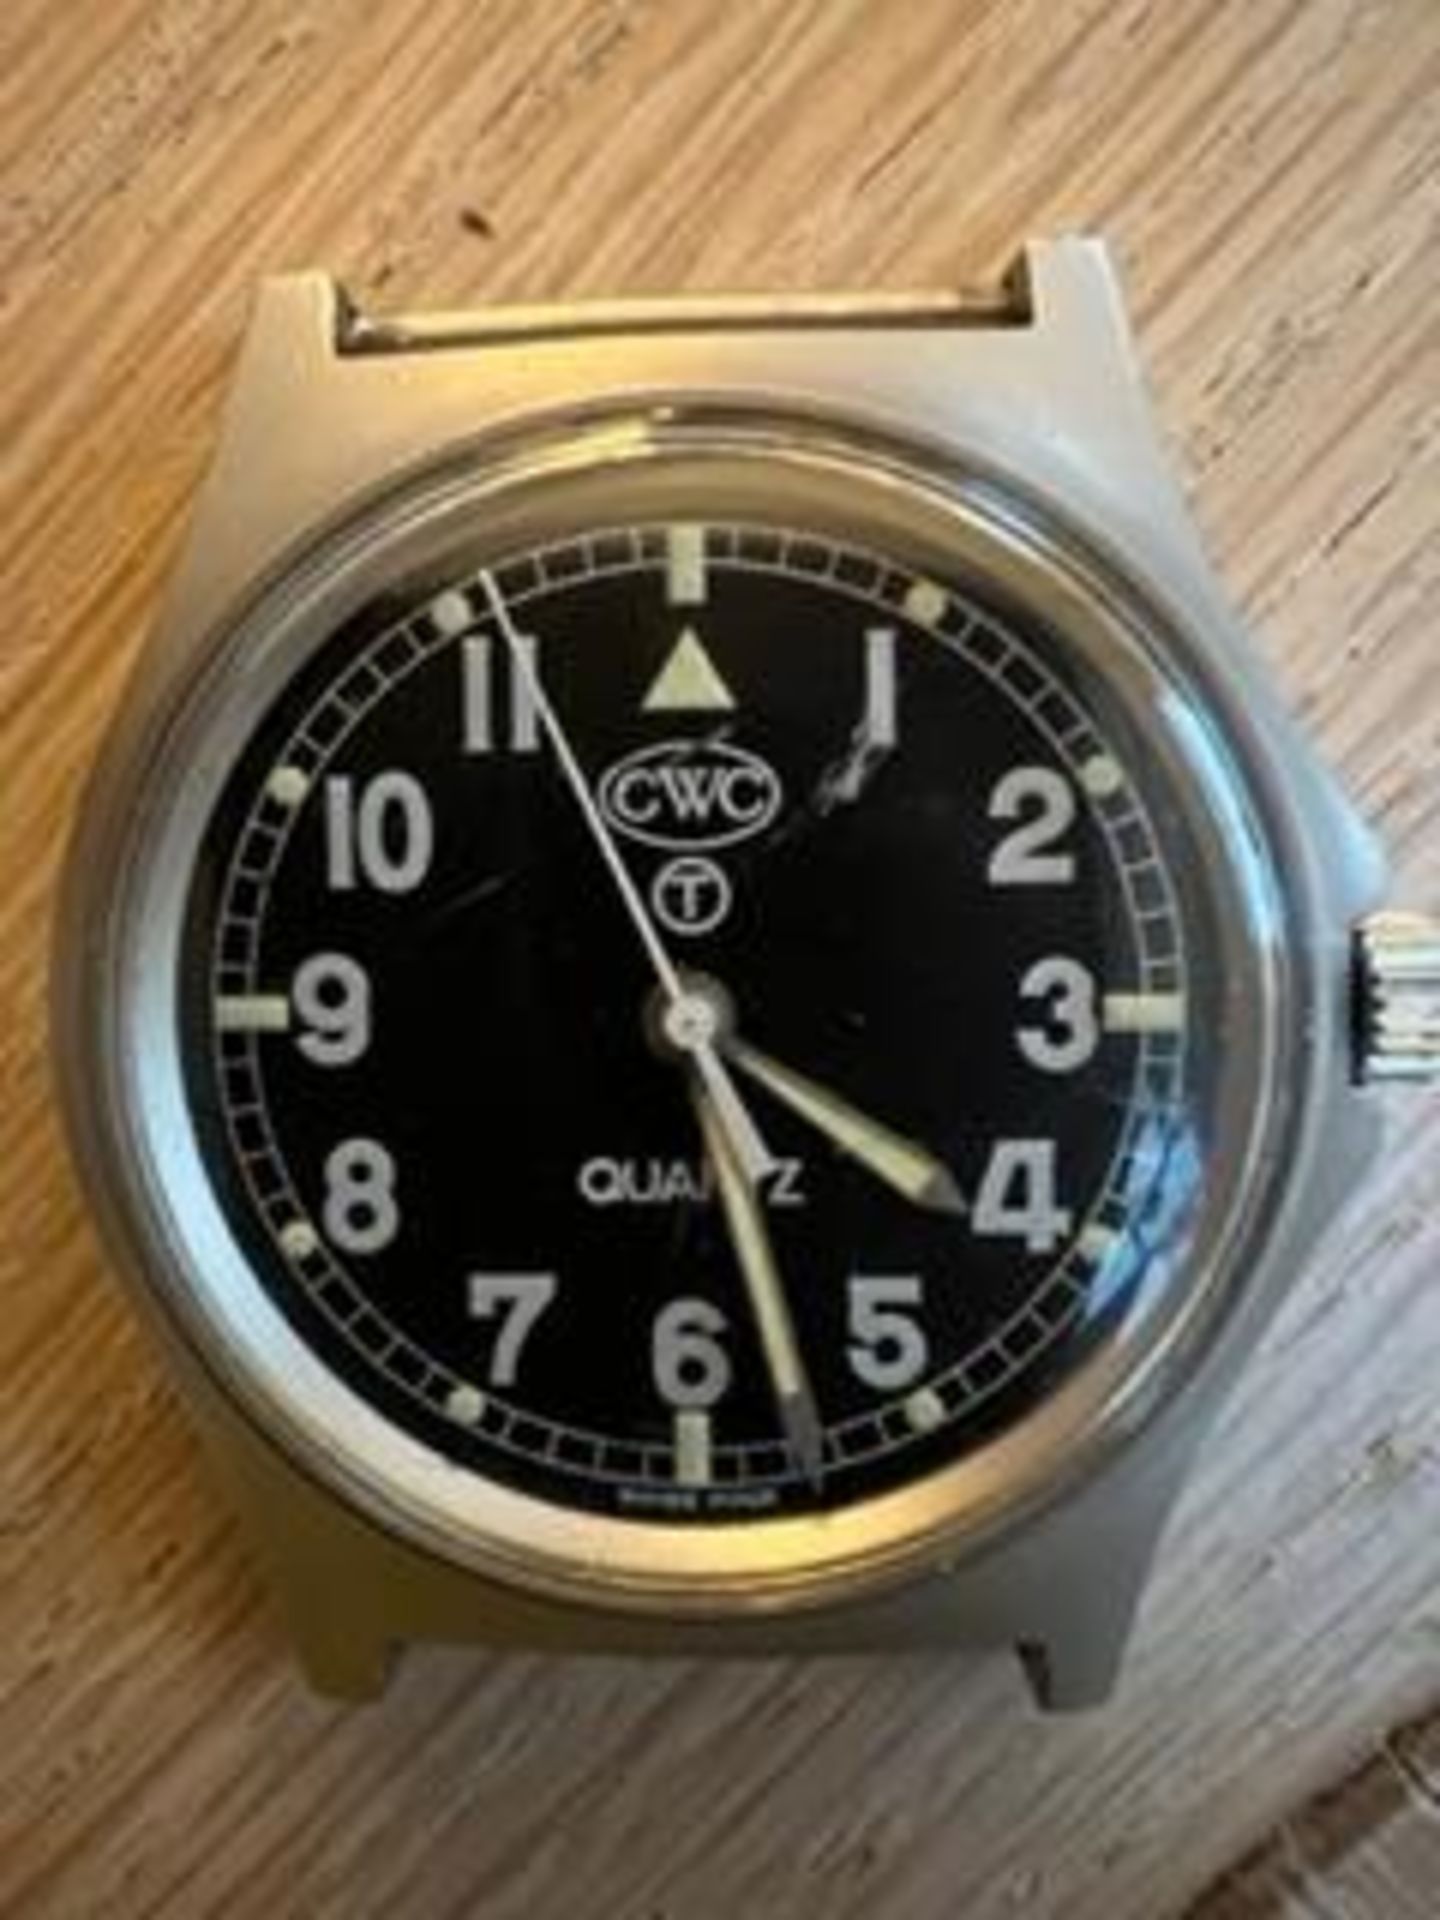 RARE CWC 0552 ROYAL MARINES ISSUE SERVICE WATCH NATO MARKS DATE 1990*** GULF WAR*** - Image 2 of 7